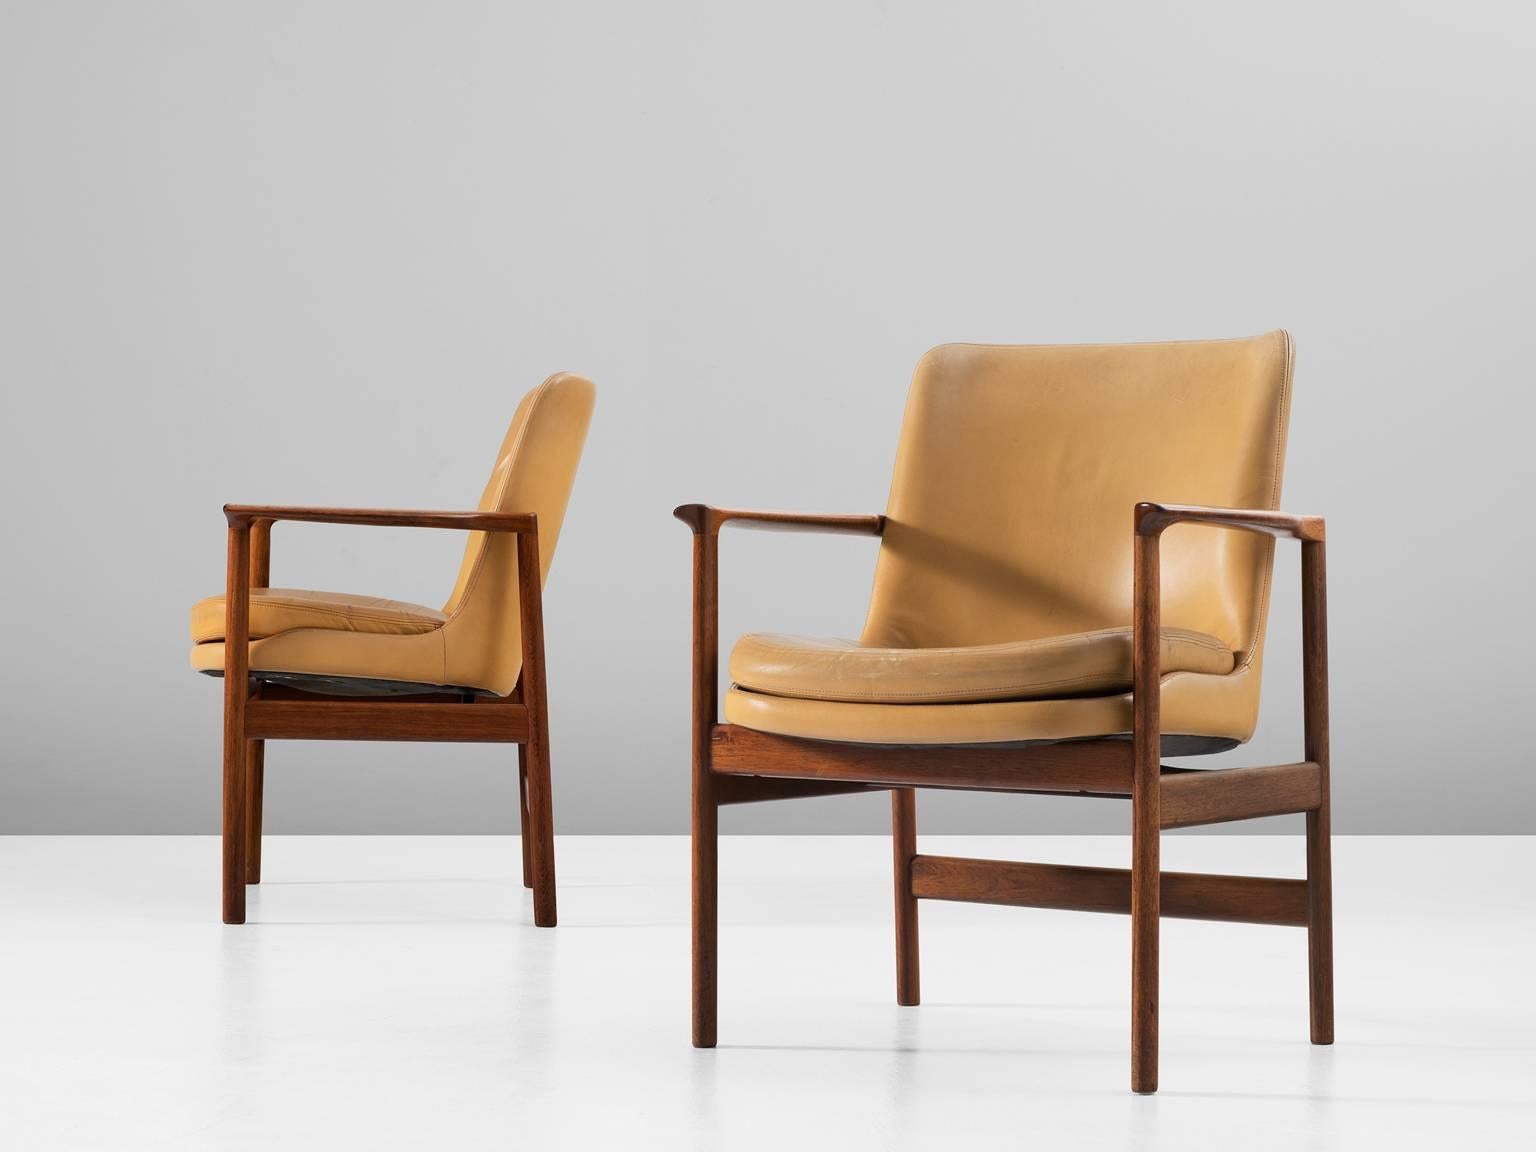 Set of two armchairs, in rosewood and leather by Ib Kofod-Larsen, Denmark, 1950s. 

Set of two elegant easy chairs by Danish designer Ib Kofod-Larsen. These dining chairs have the characteristics of the iconic Elizabeth chair of Kofod-Larsen. The